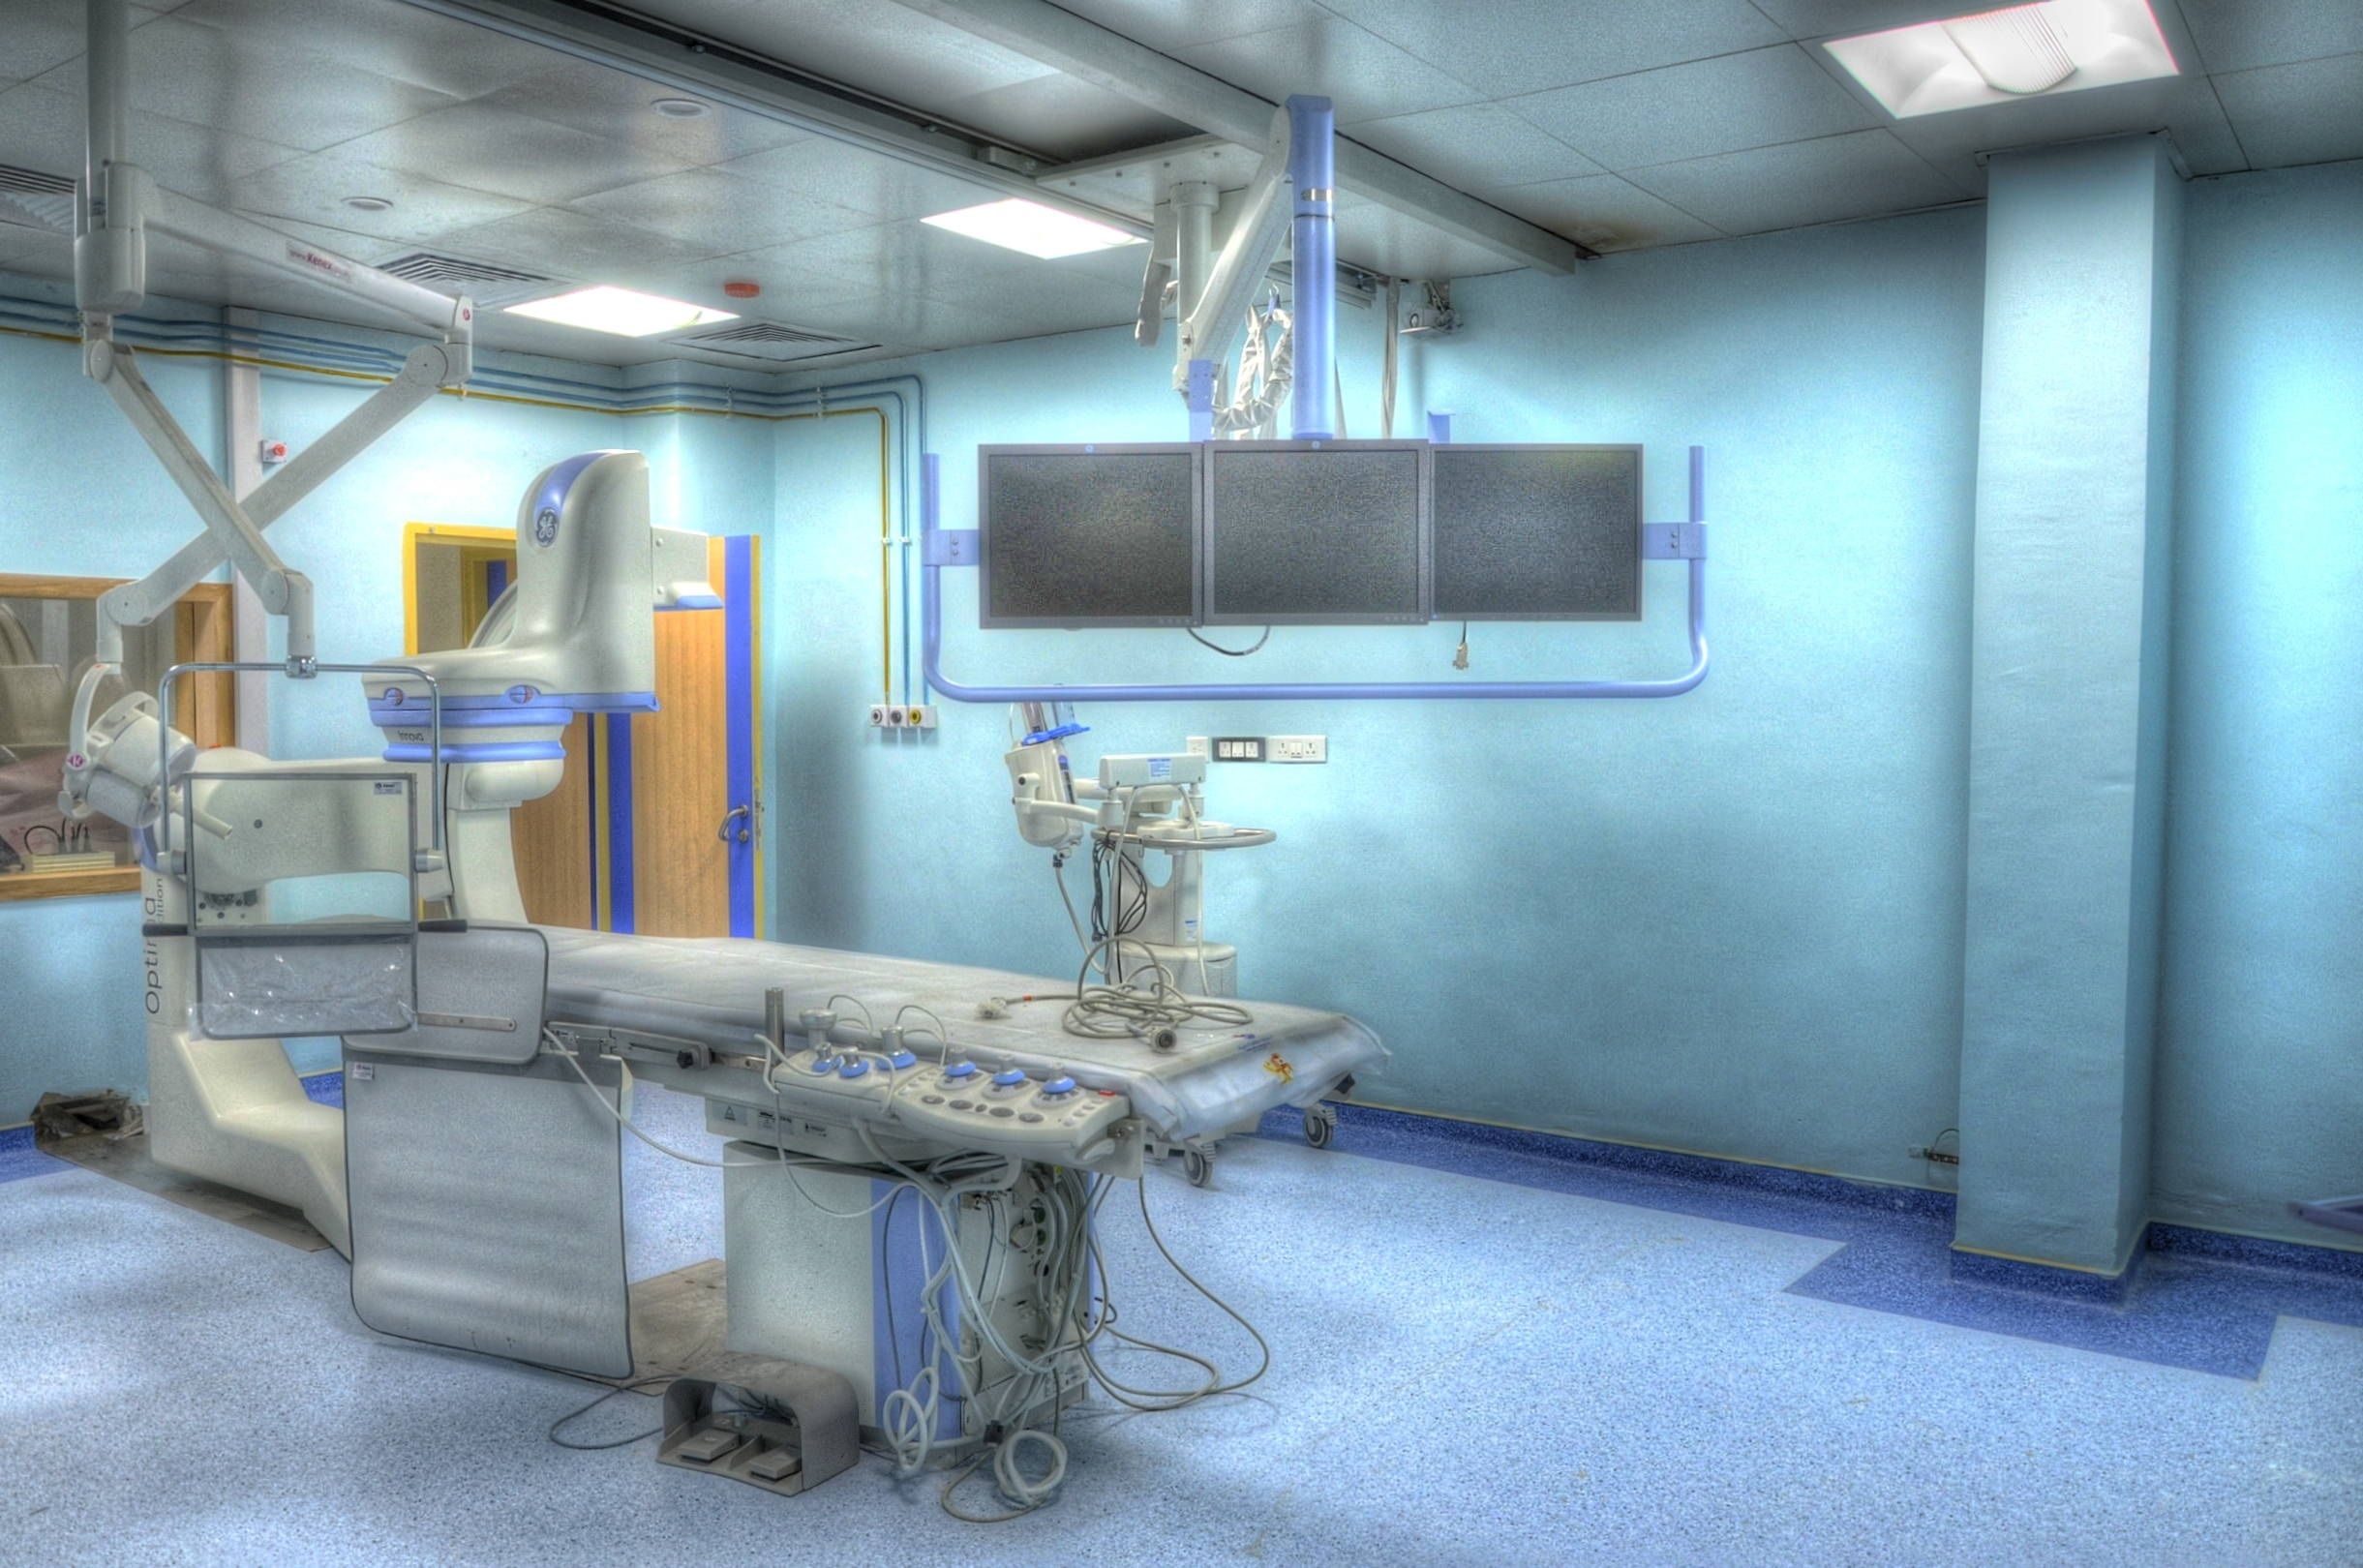 A hospital operating theater HD Wallpaper. Background Image